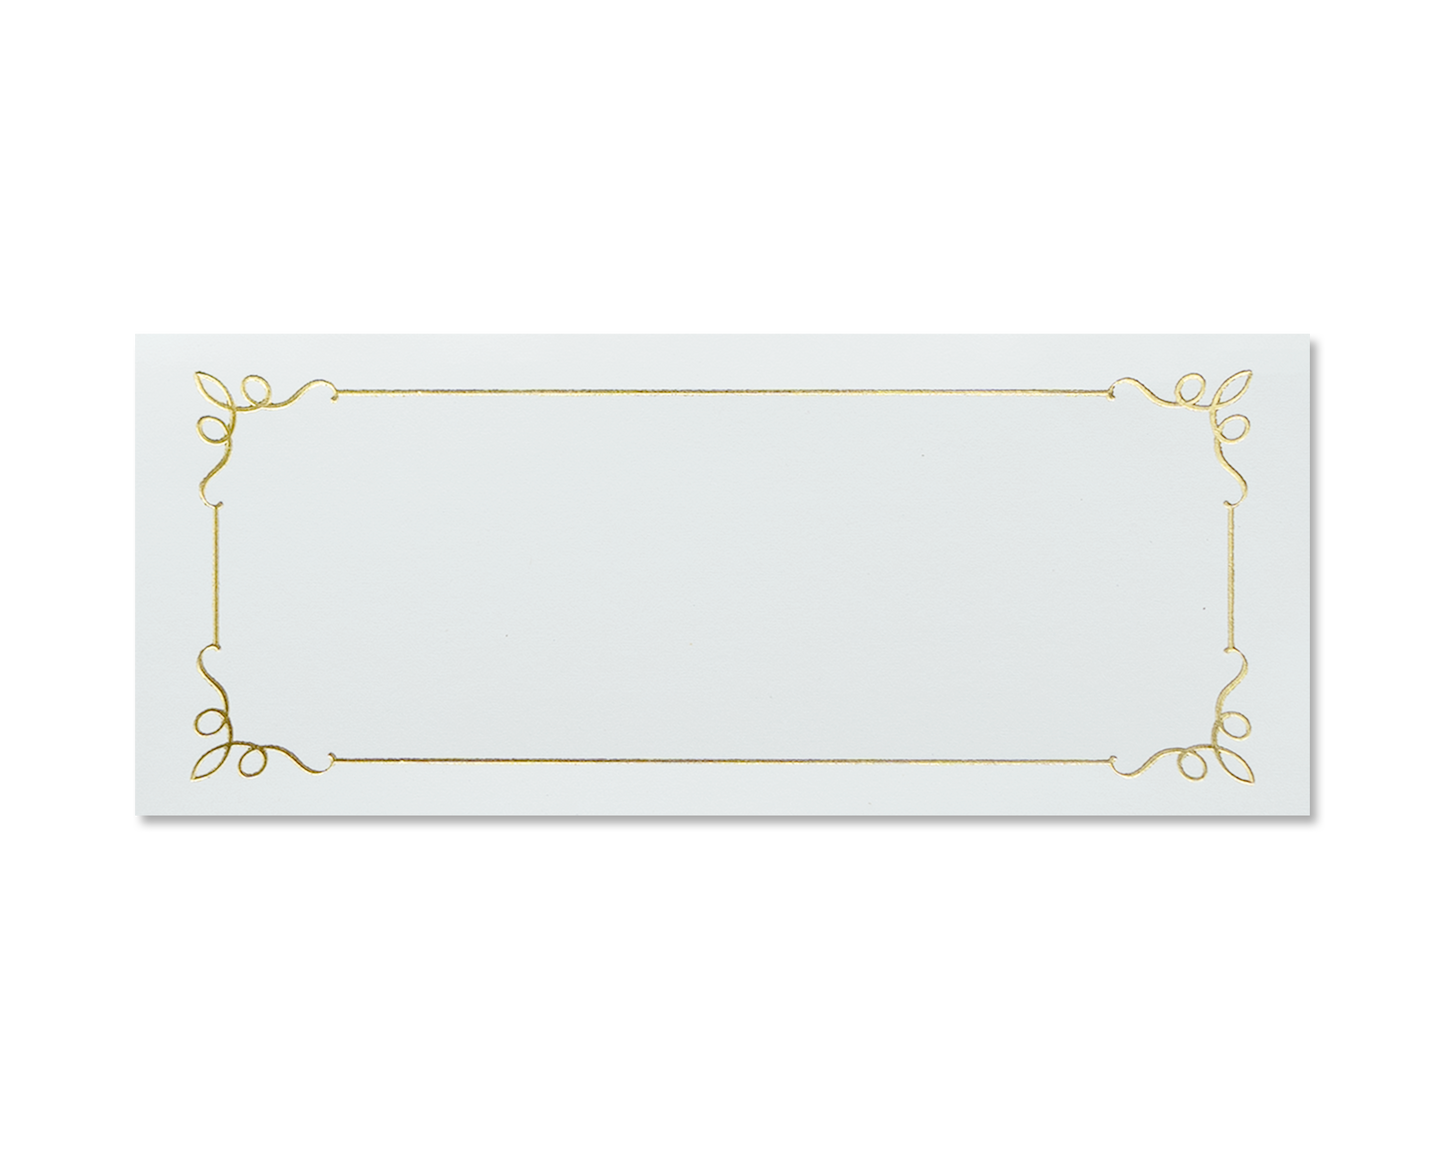 St. James® Overtures® Embassy Place Cards, Ivory, Gold Foil, Fold to 1¾ x 4¼", Pack of 60, 71458